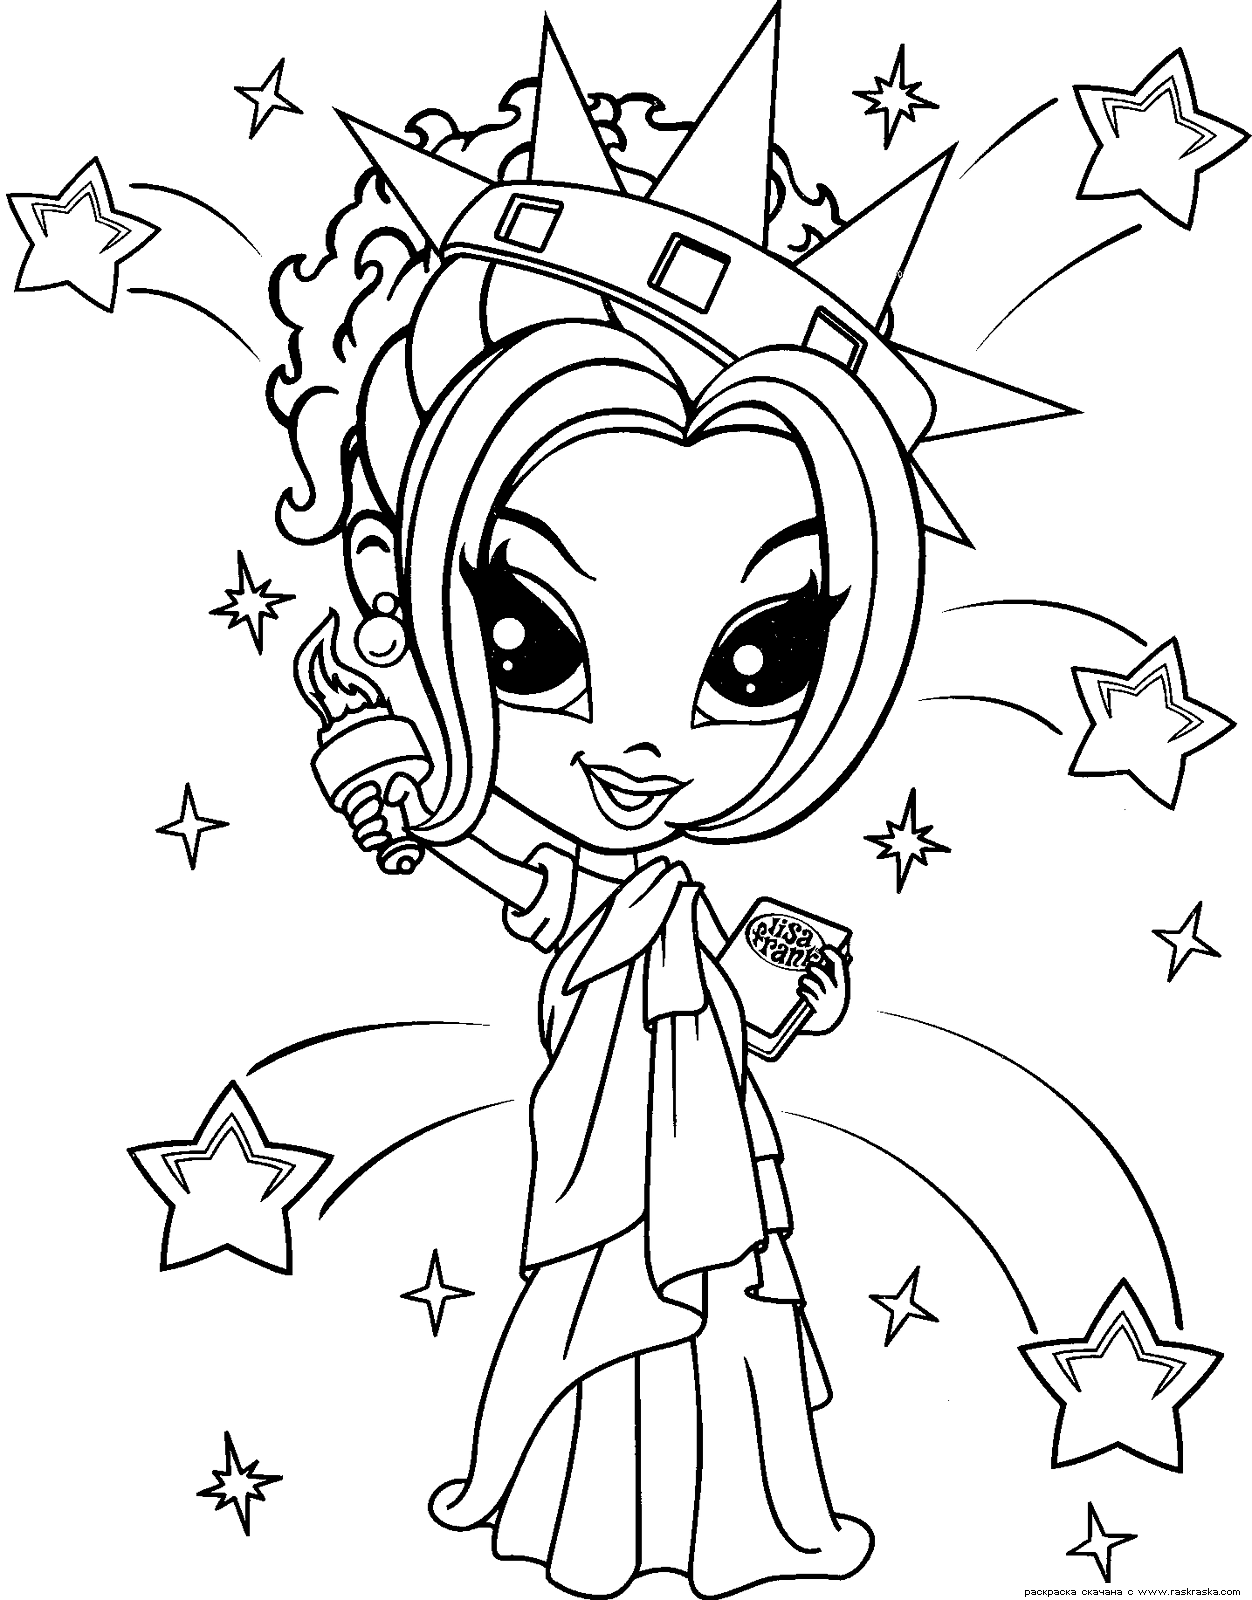 lisa-frank coloring pages 13,printable,coloring pages